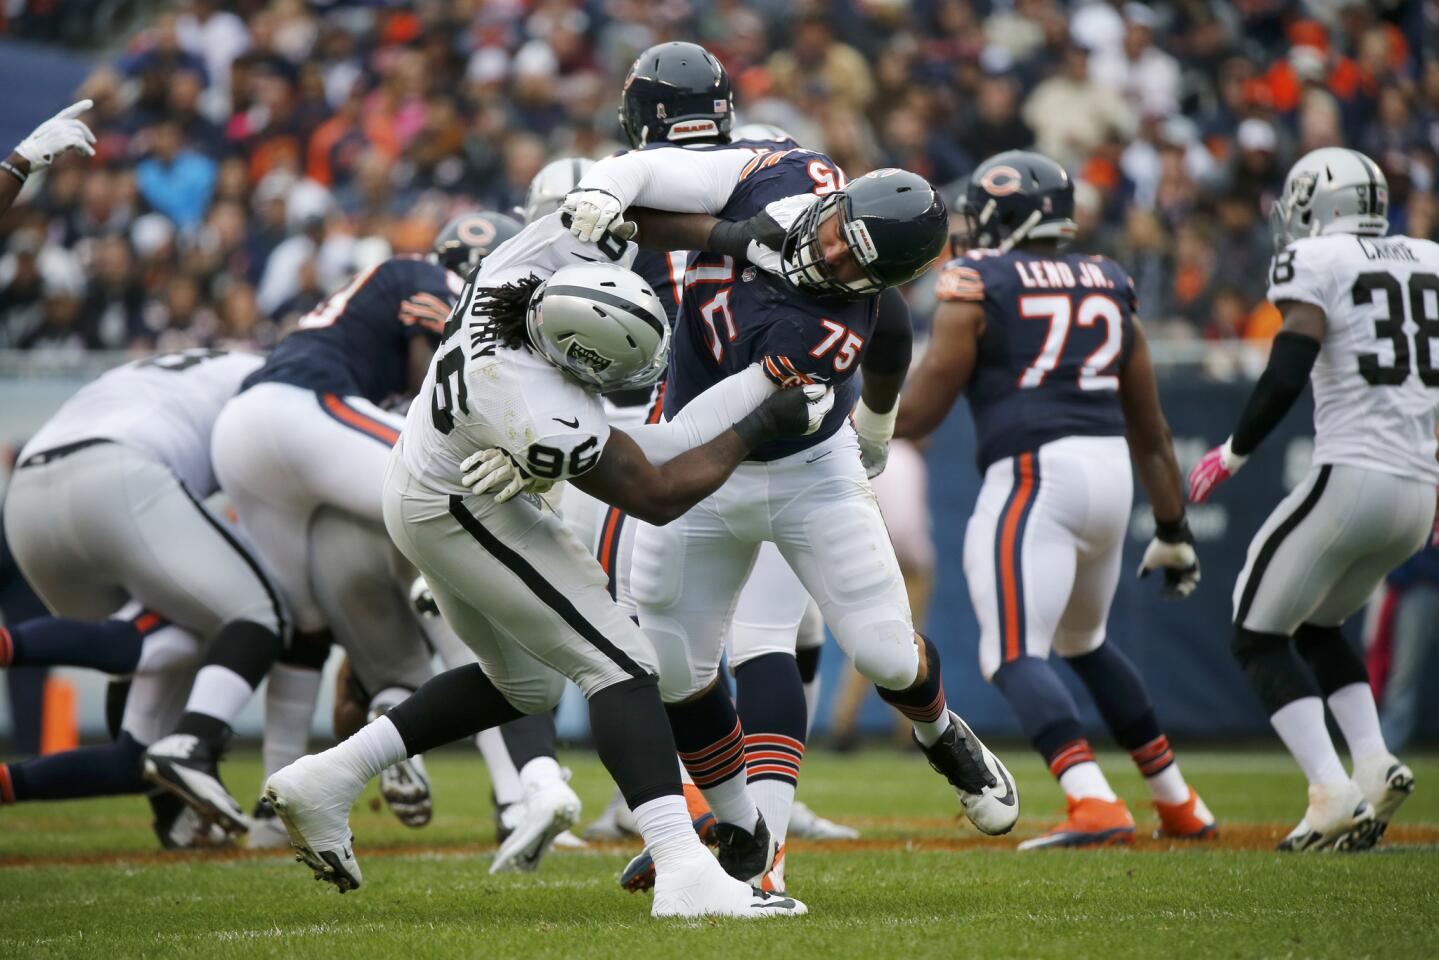 Kyle Long battles with Raiders defensive end Denico Autry at Soldier Field on Oct. 4, 2015.